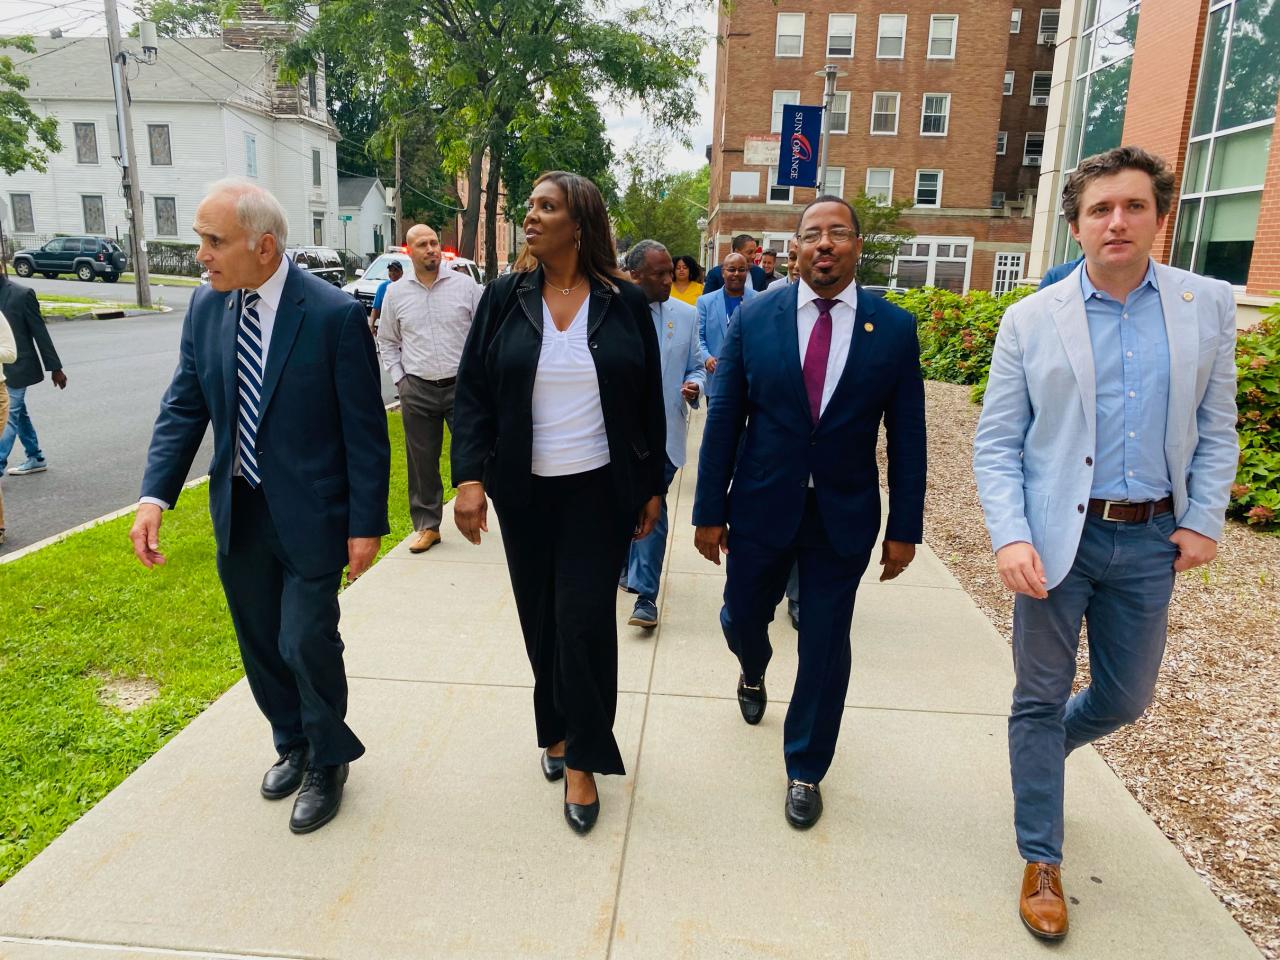 Tish James walks the streets with other important figures